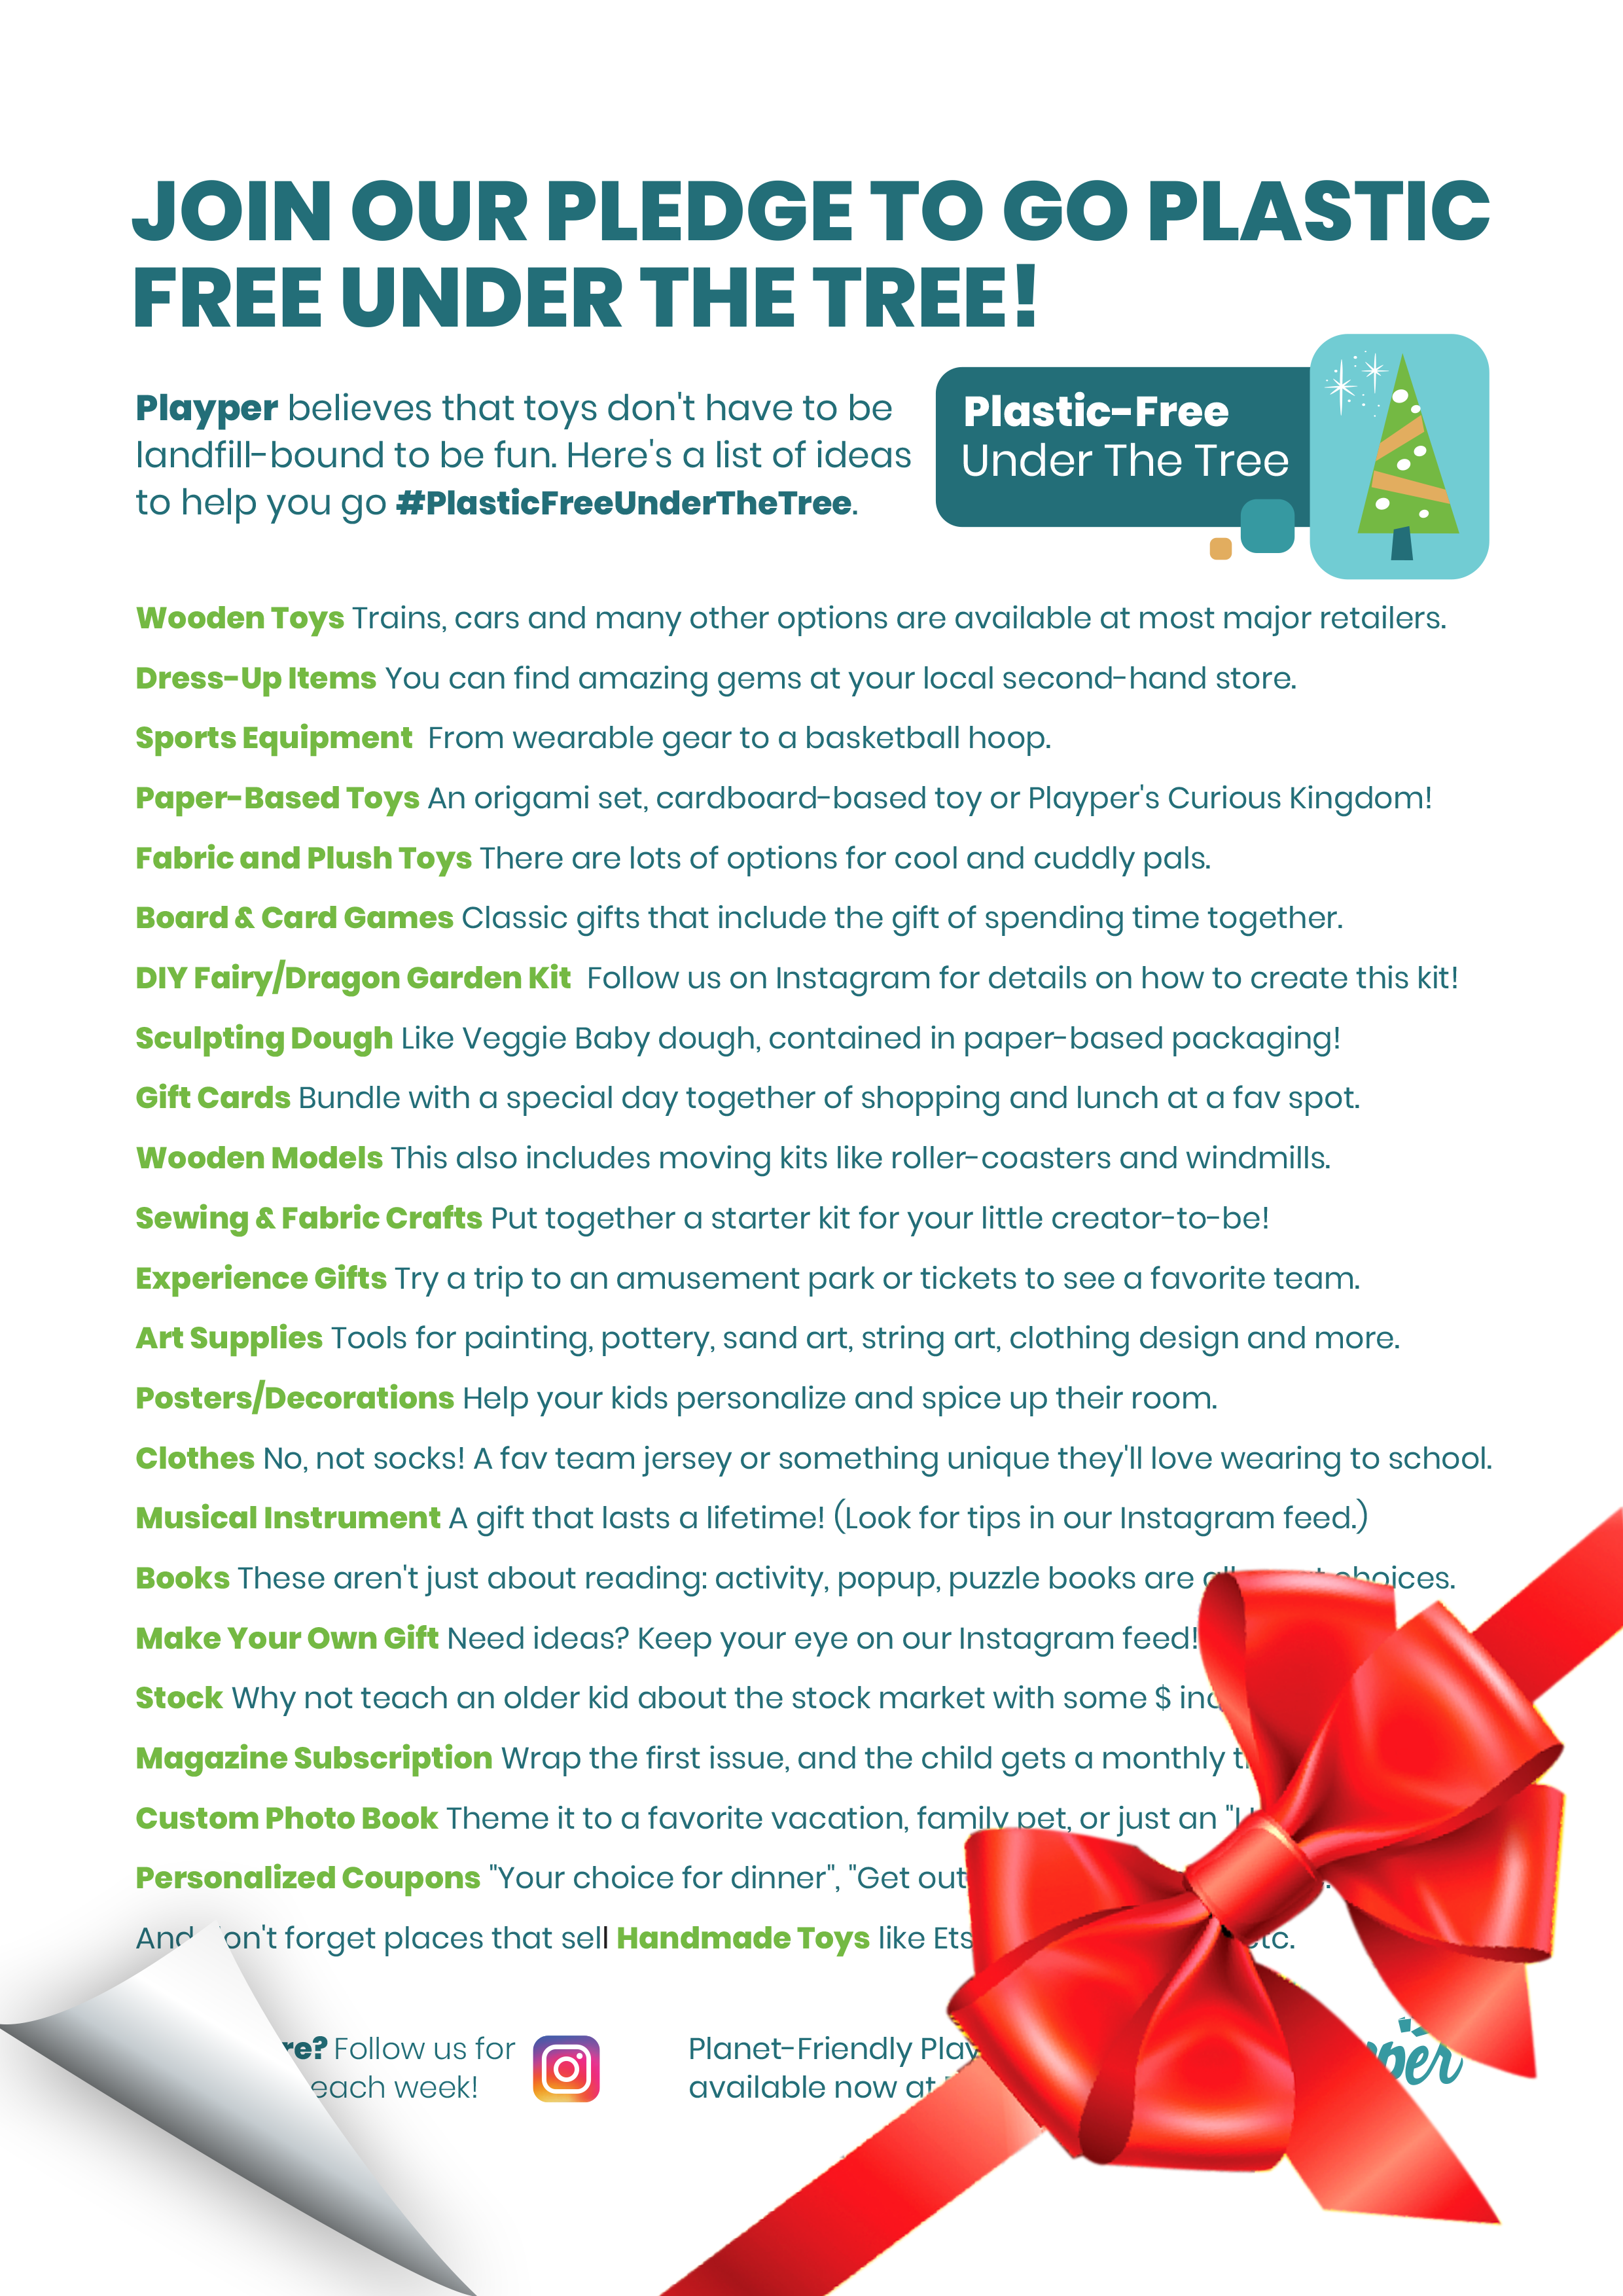 Plastic-Free Under the Tree: Join the Movement!